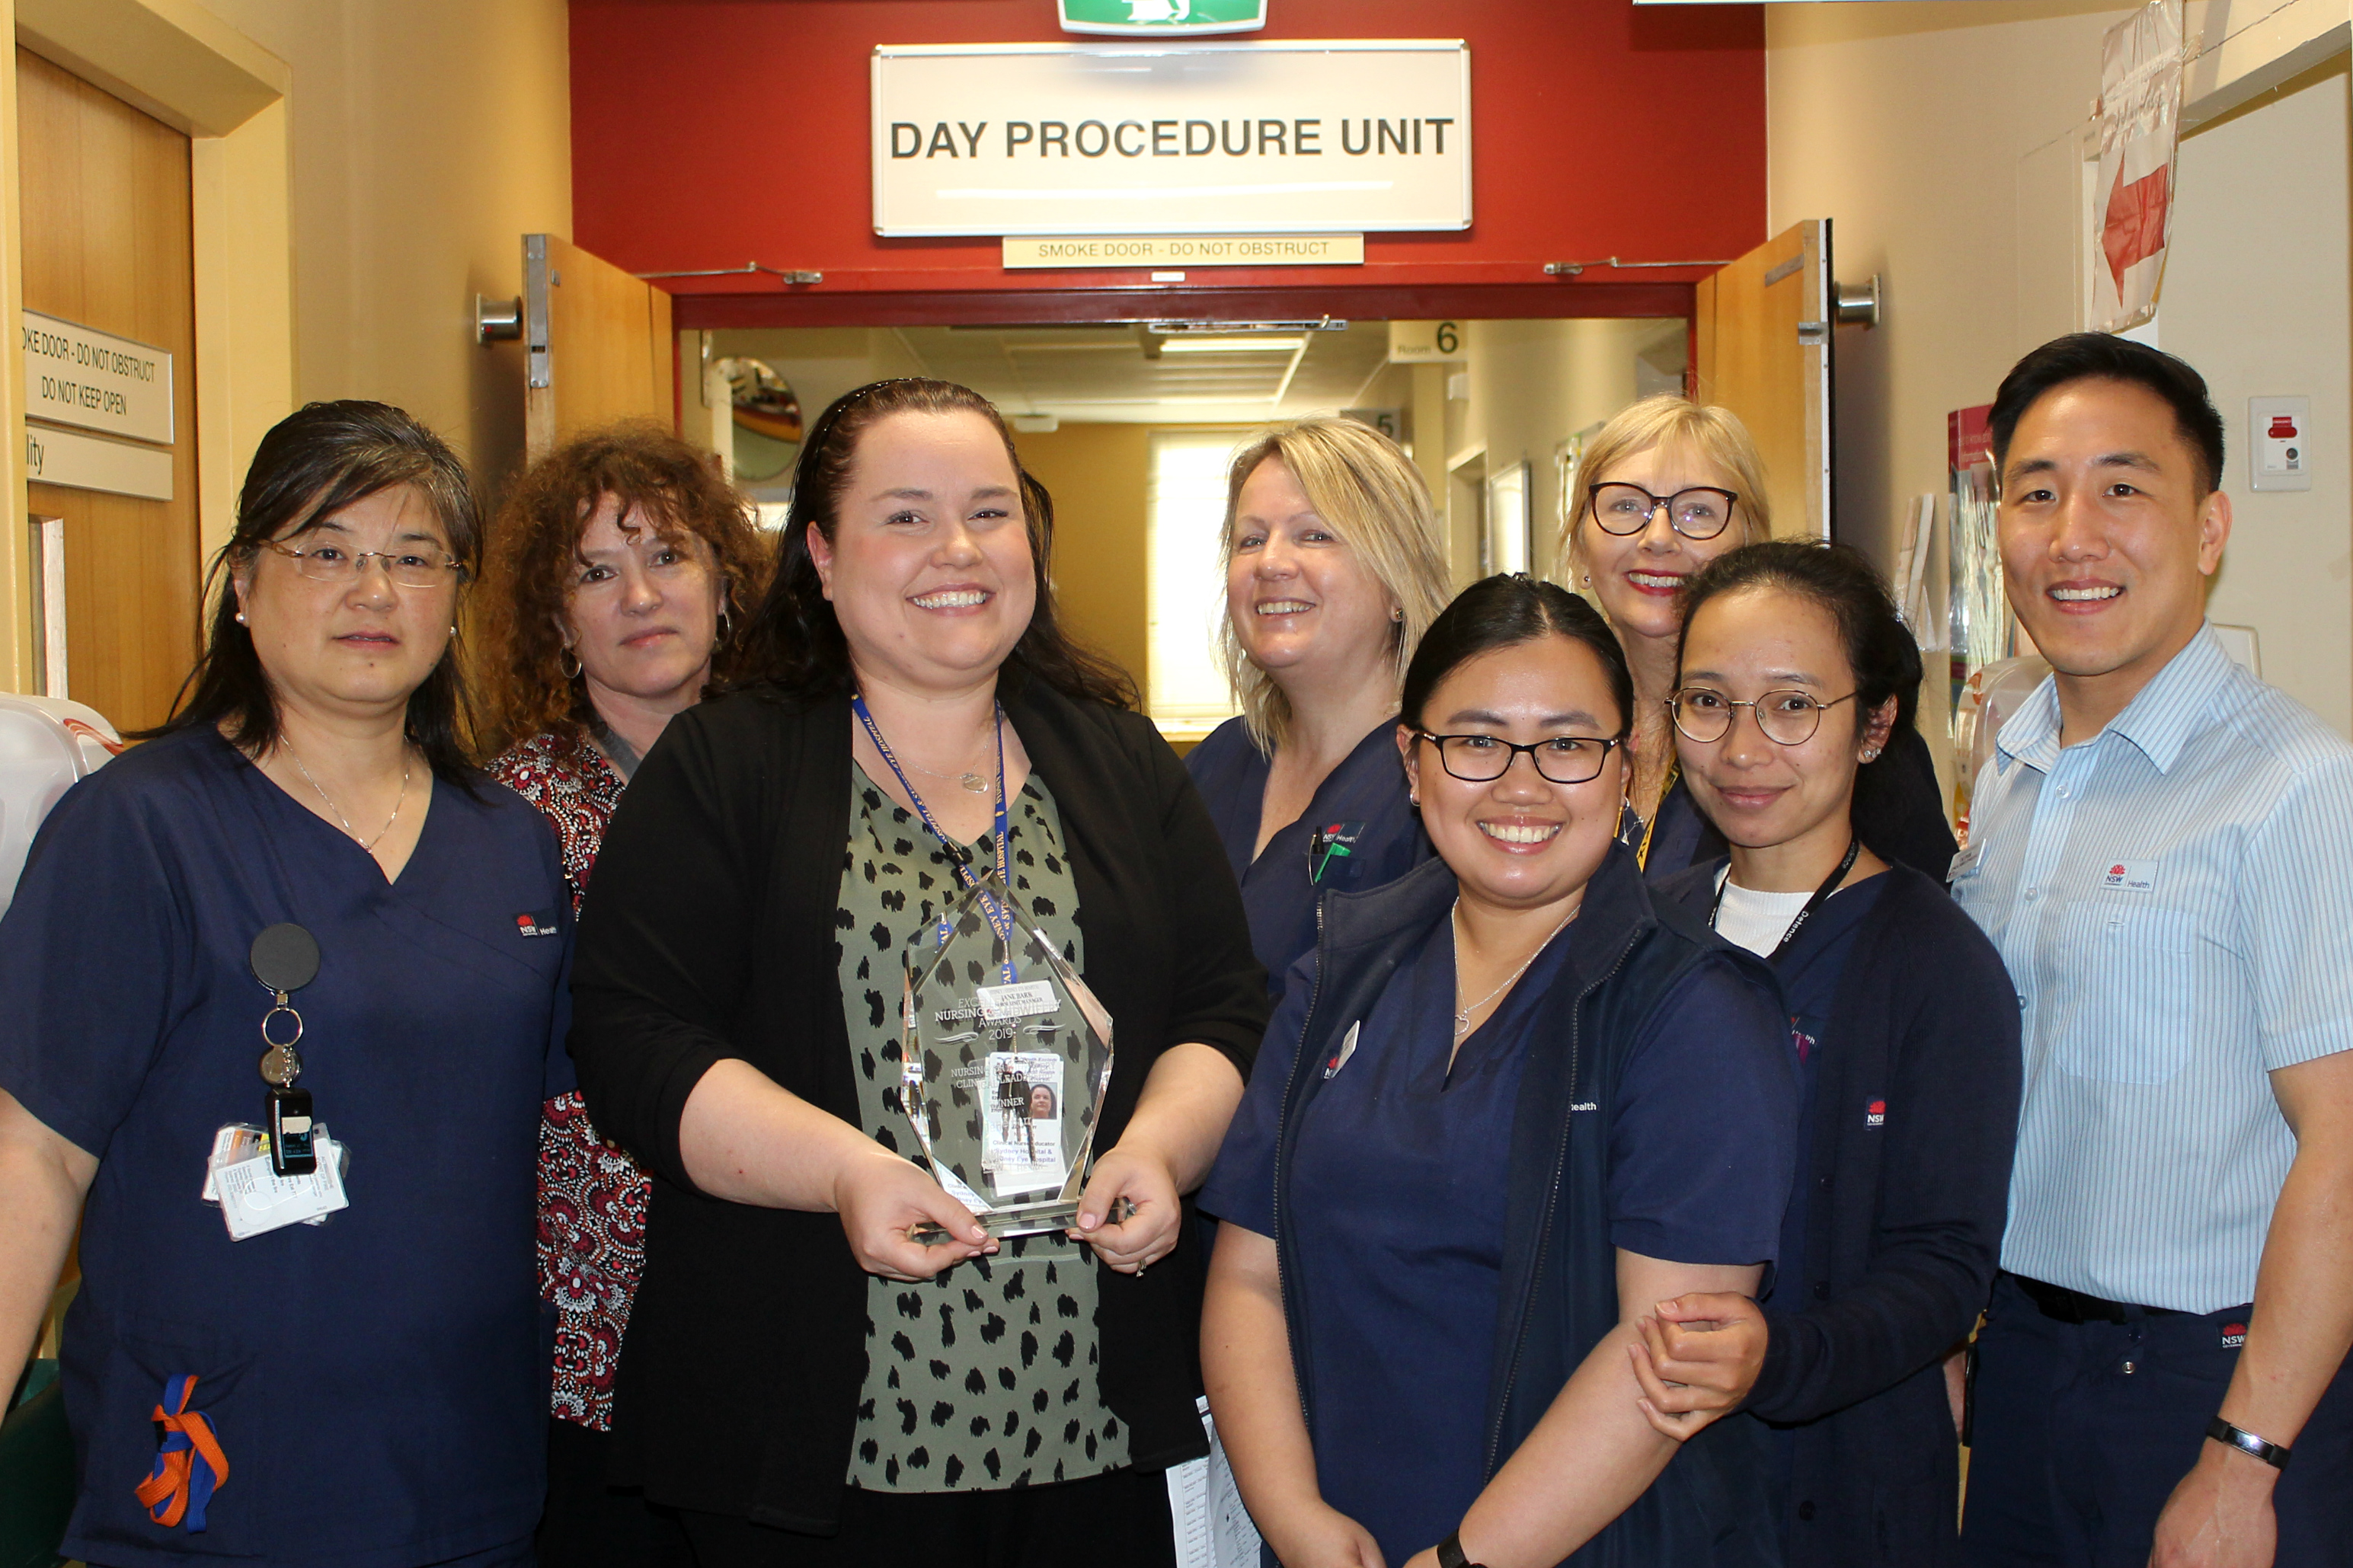 Nurse holding award surrounded by her team in the hall of their ward